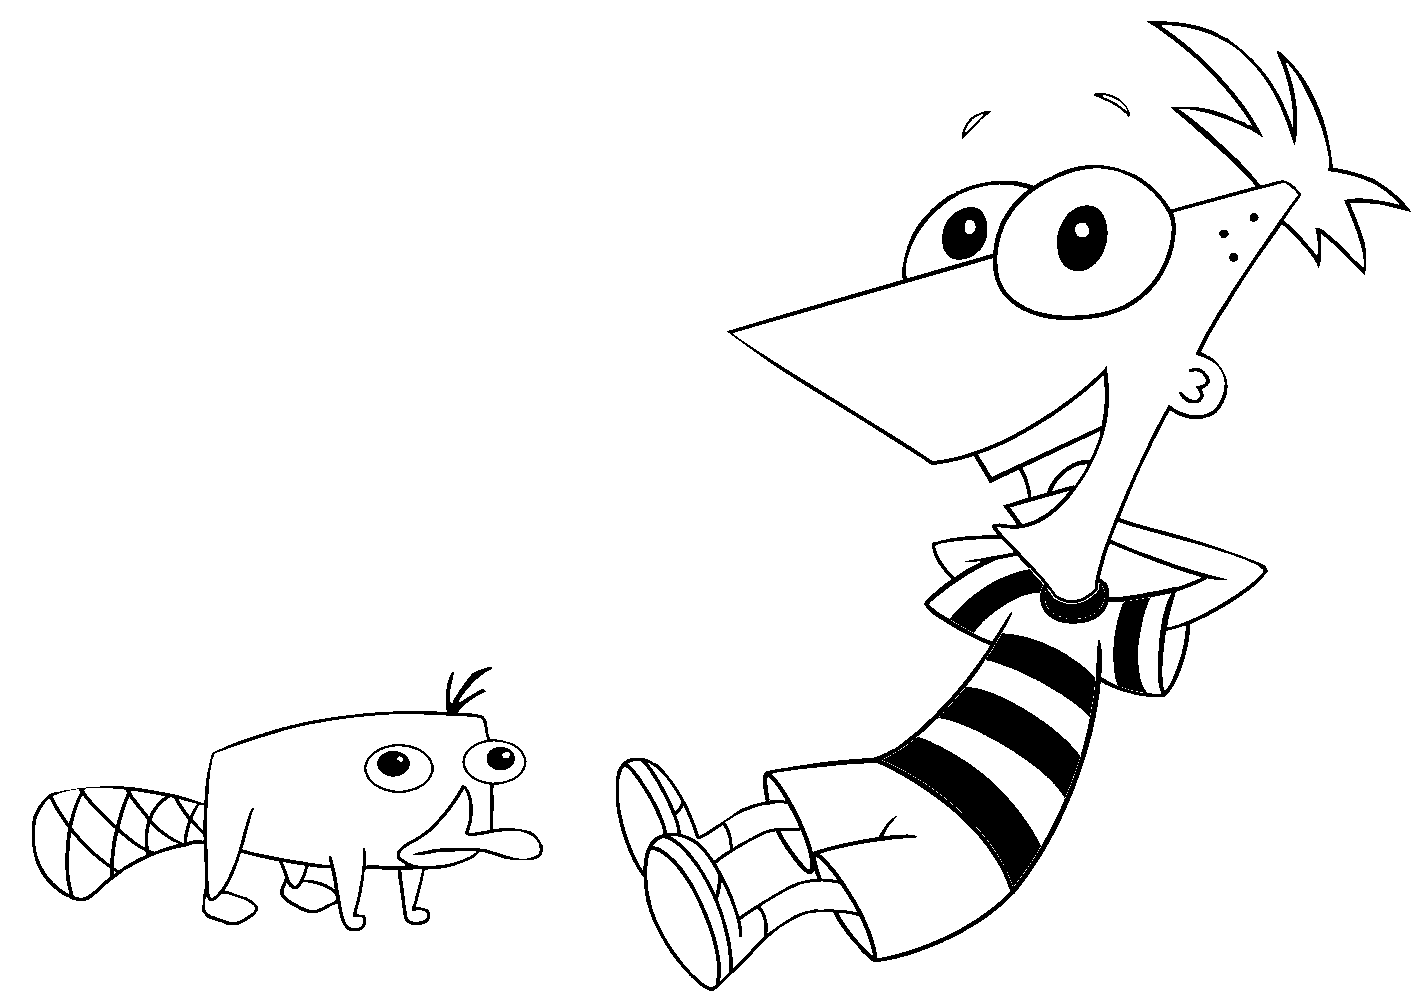 Printable Coloring Page of Perry the platypus with Phineas & Ferb